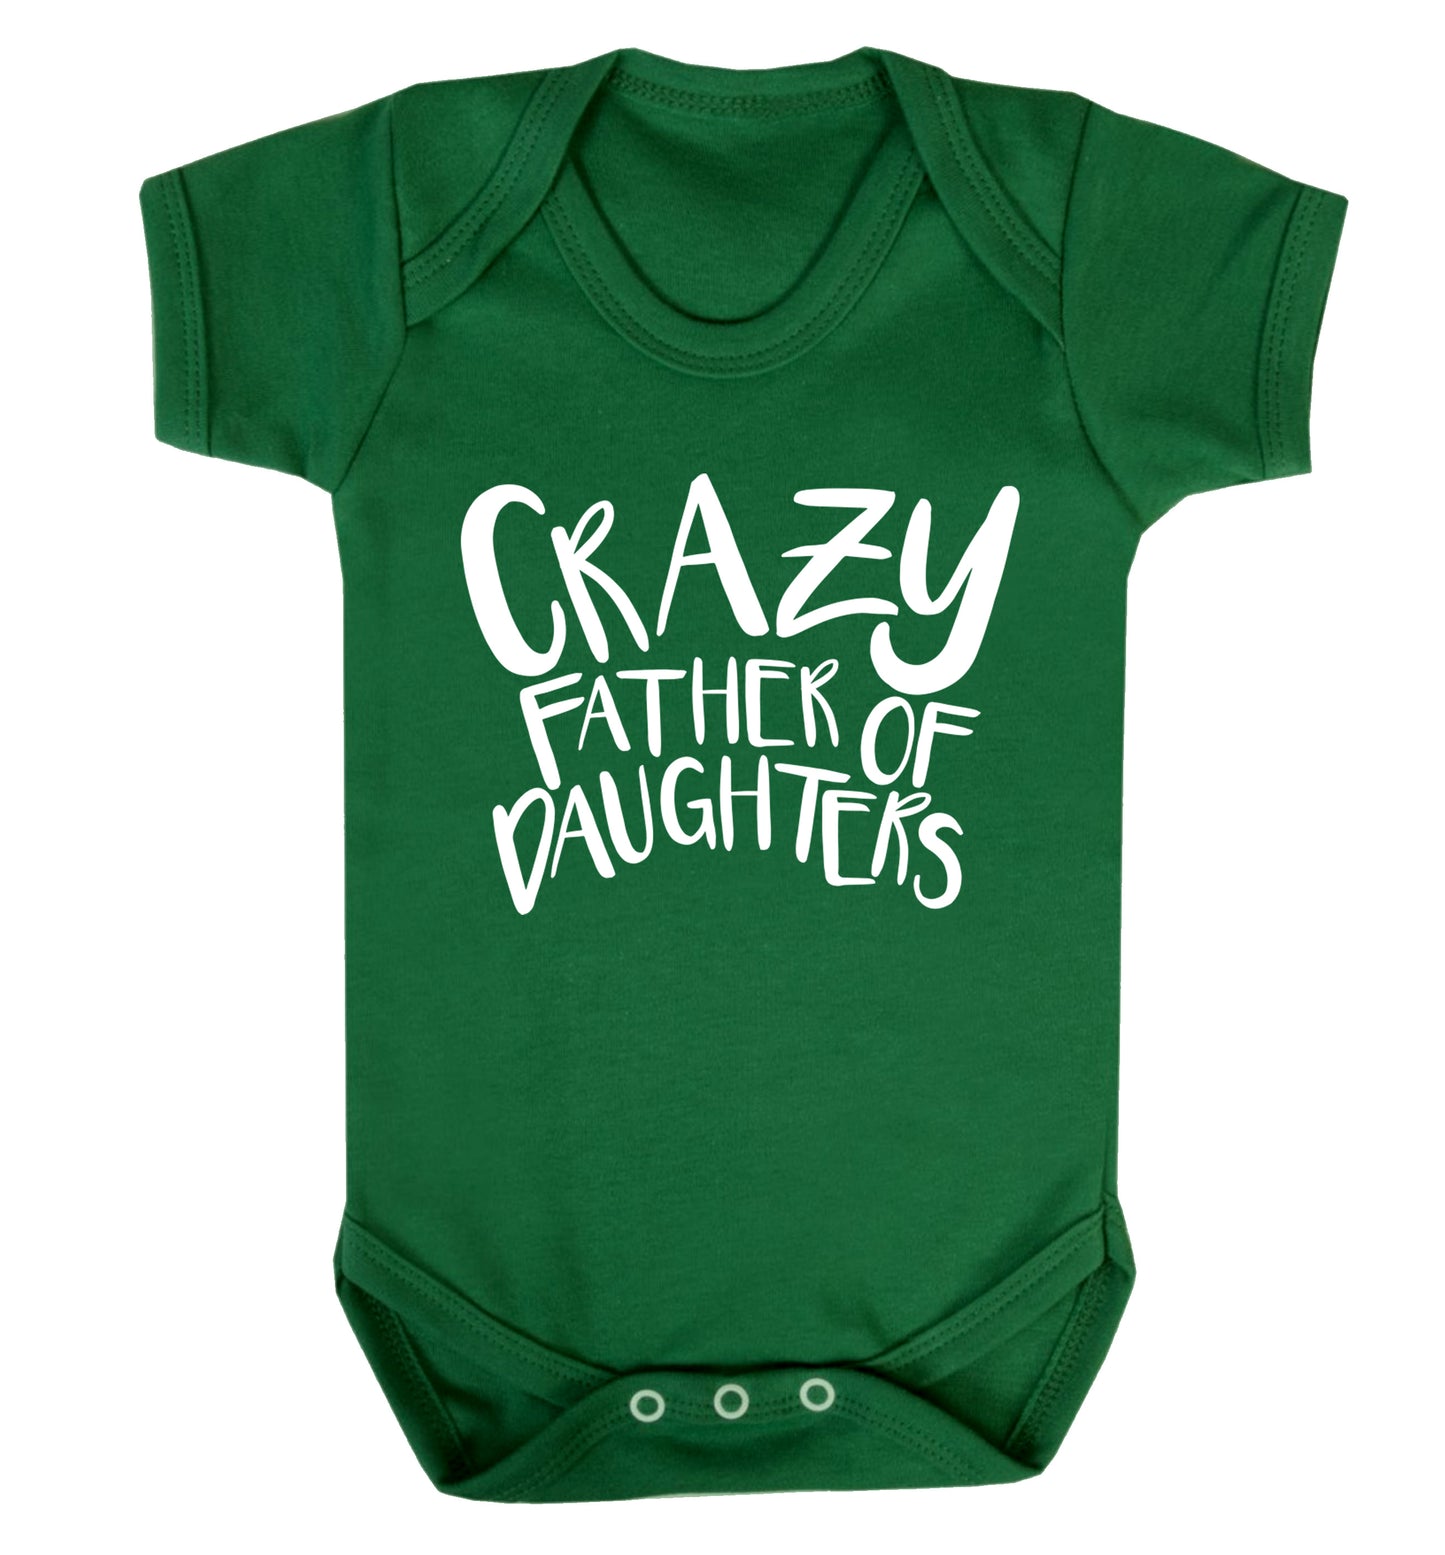 Crazy father of daughters Baby Vest green 18-24 months